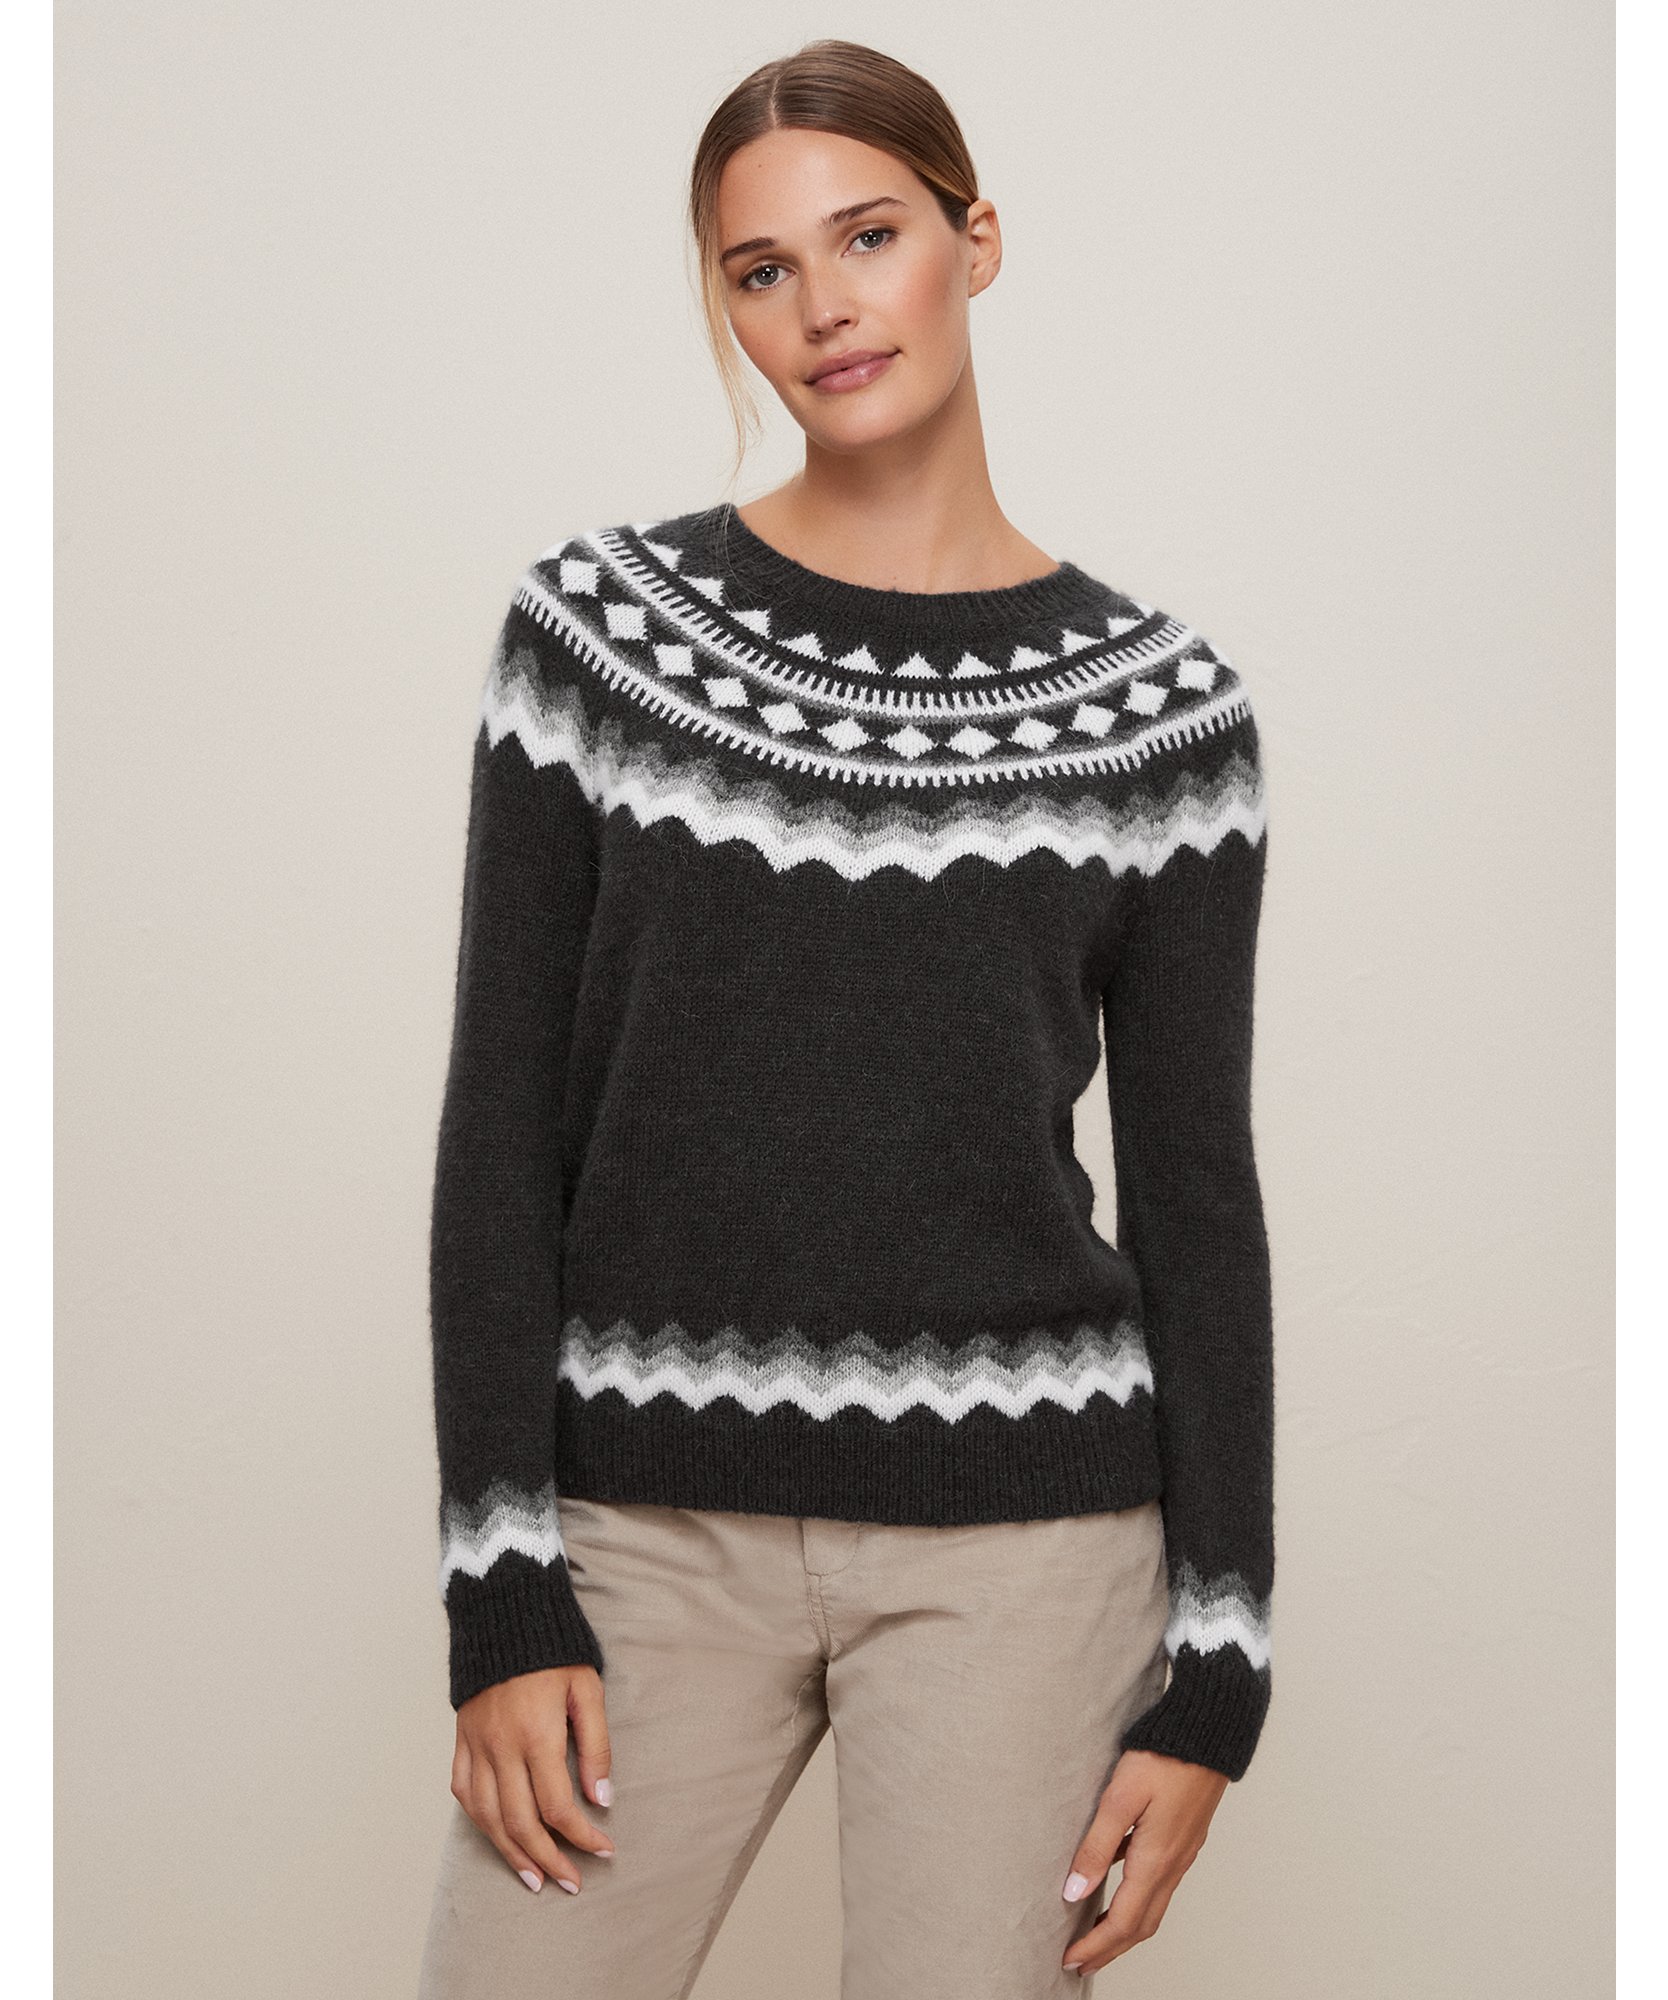 Graphic Fair Isle Sweater with Alpaca | Sweaters & Cardigans | The ...